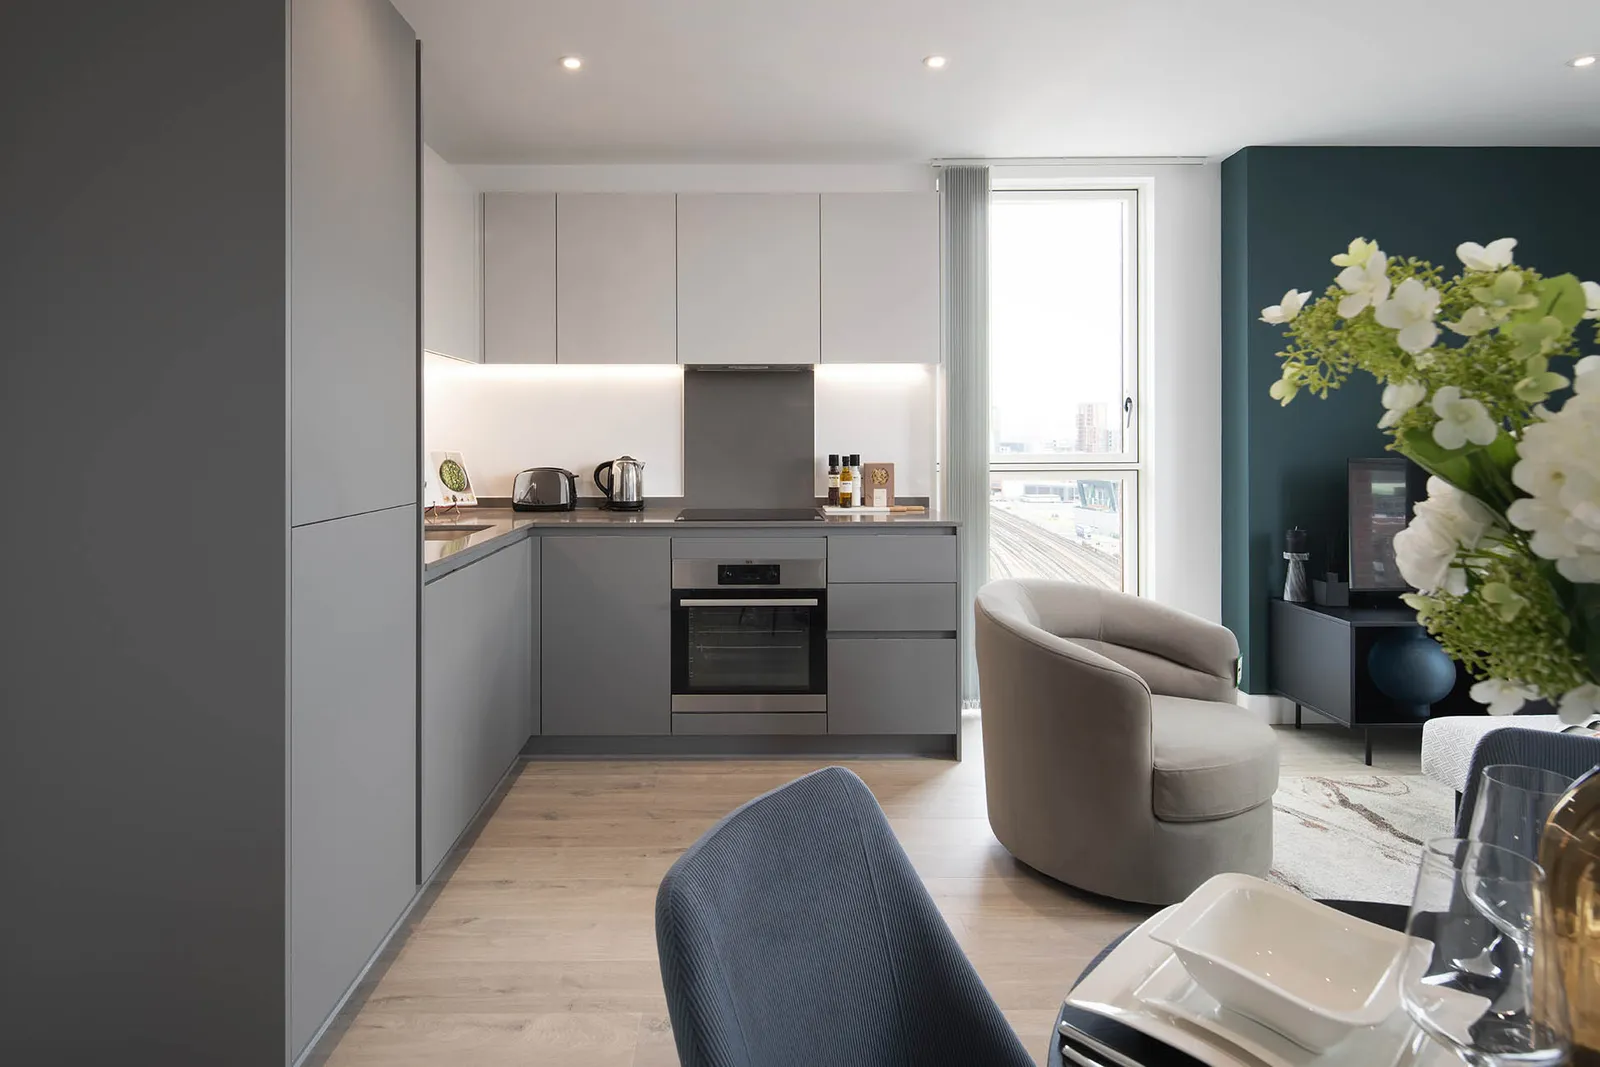 New Mansion Square battersea shared ownership